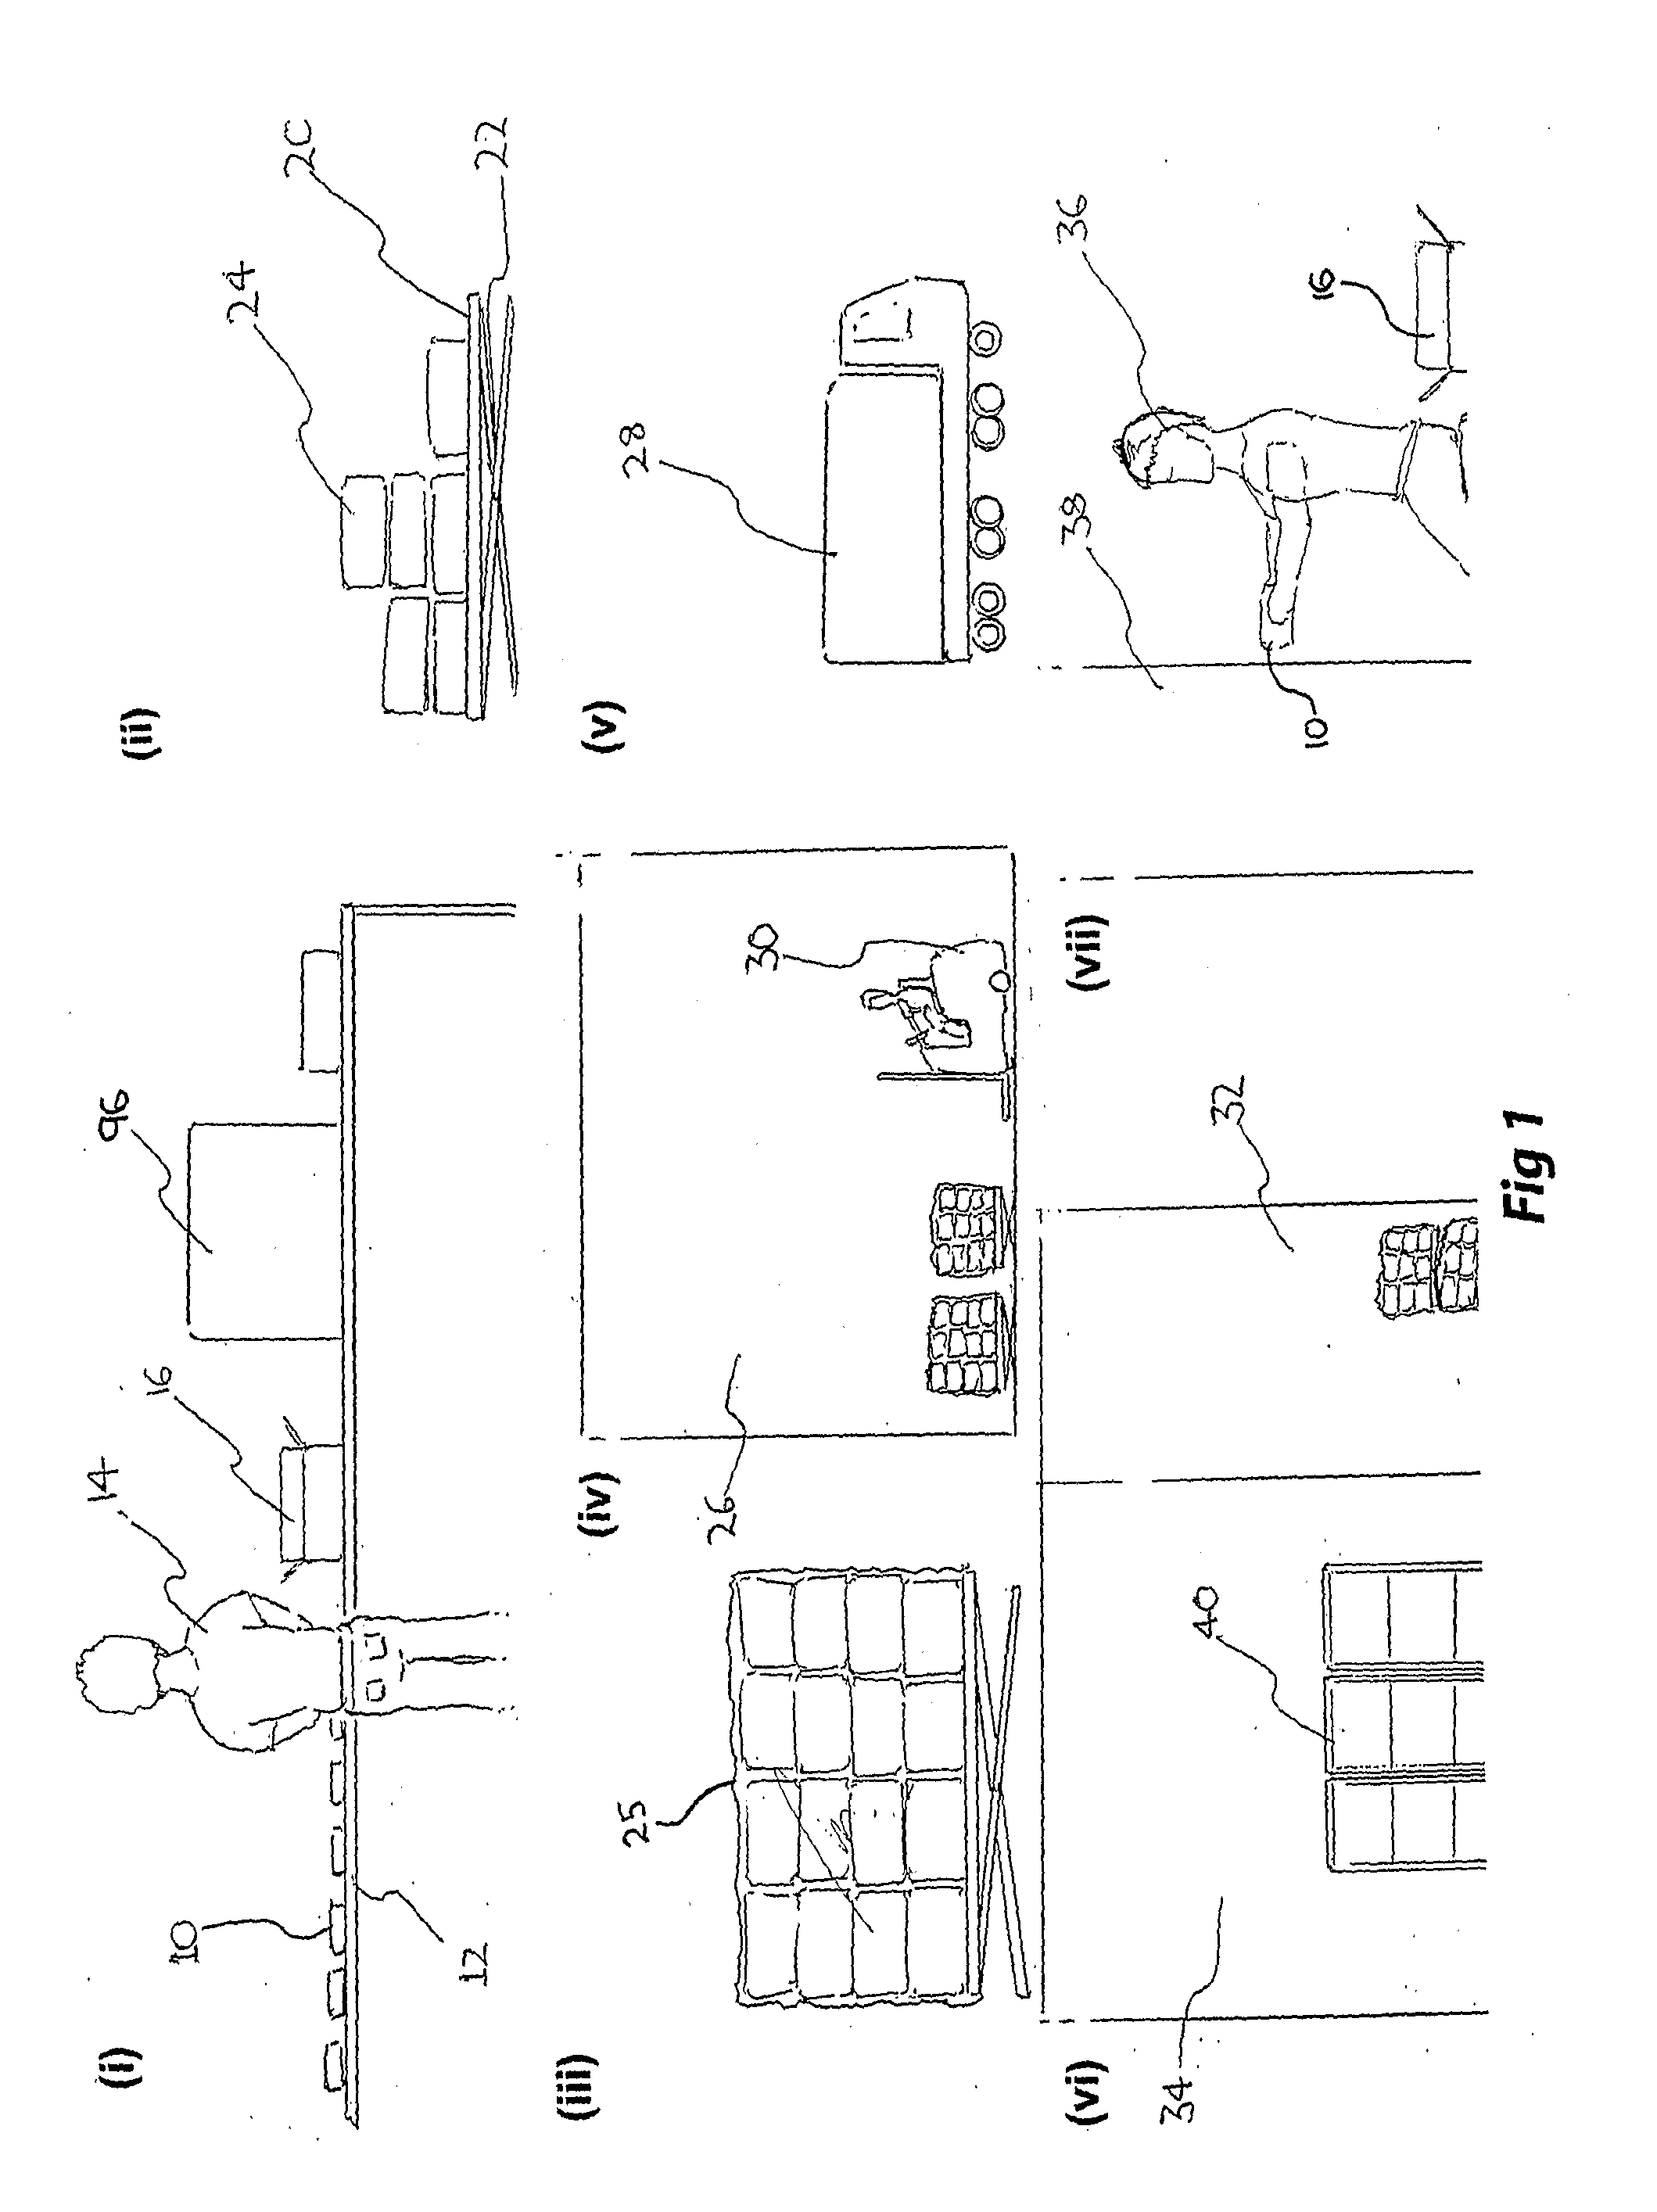 Method And Apparatus For Displaying Articles For Sale Within A Shelf Structure